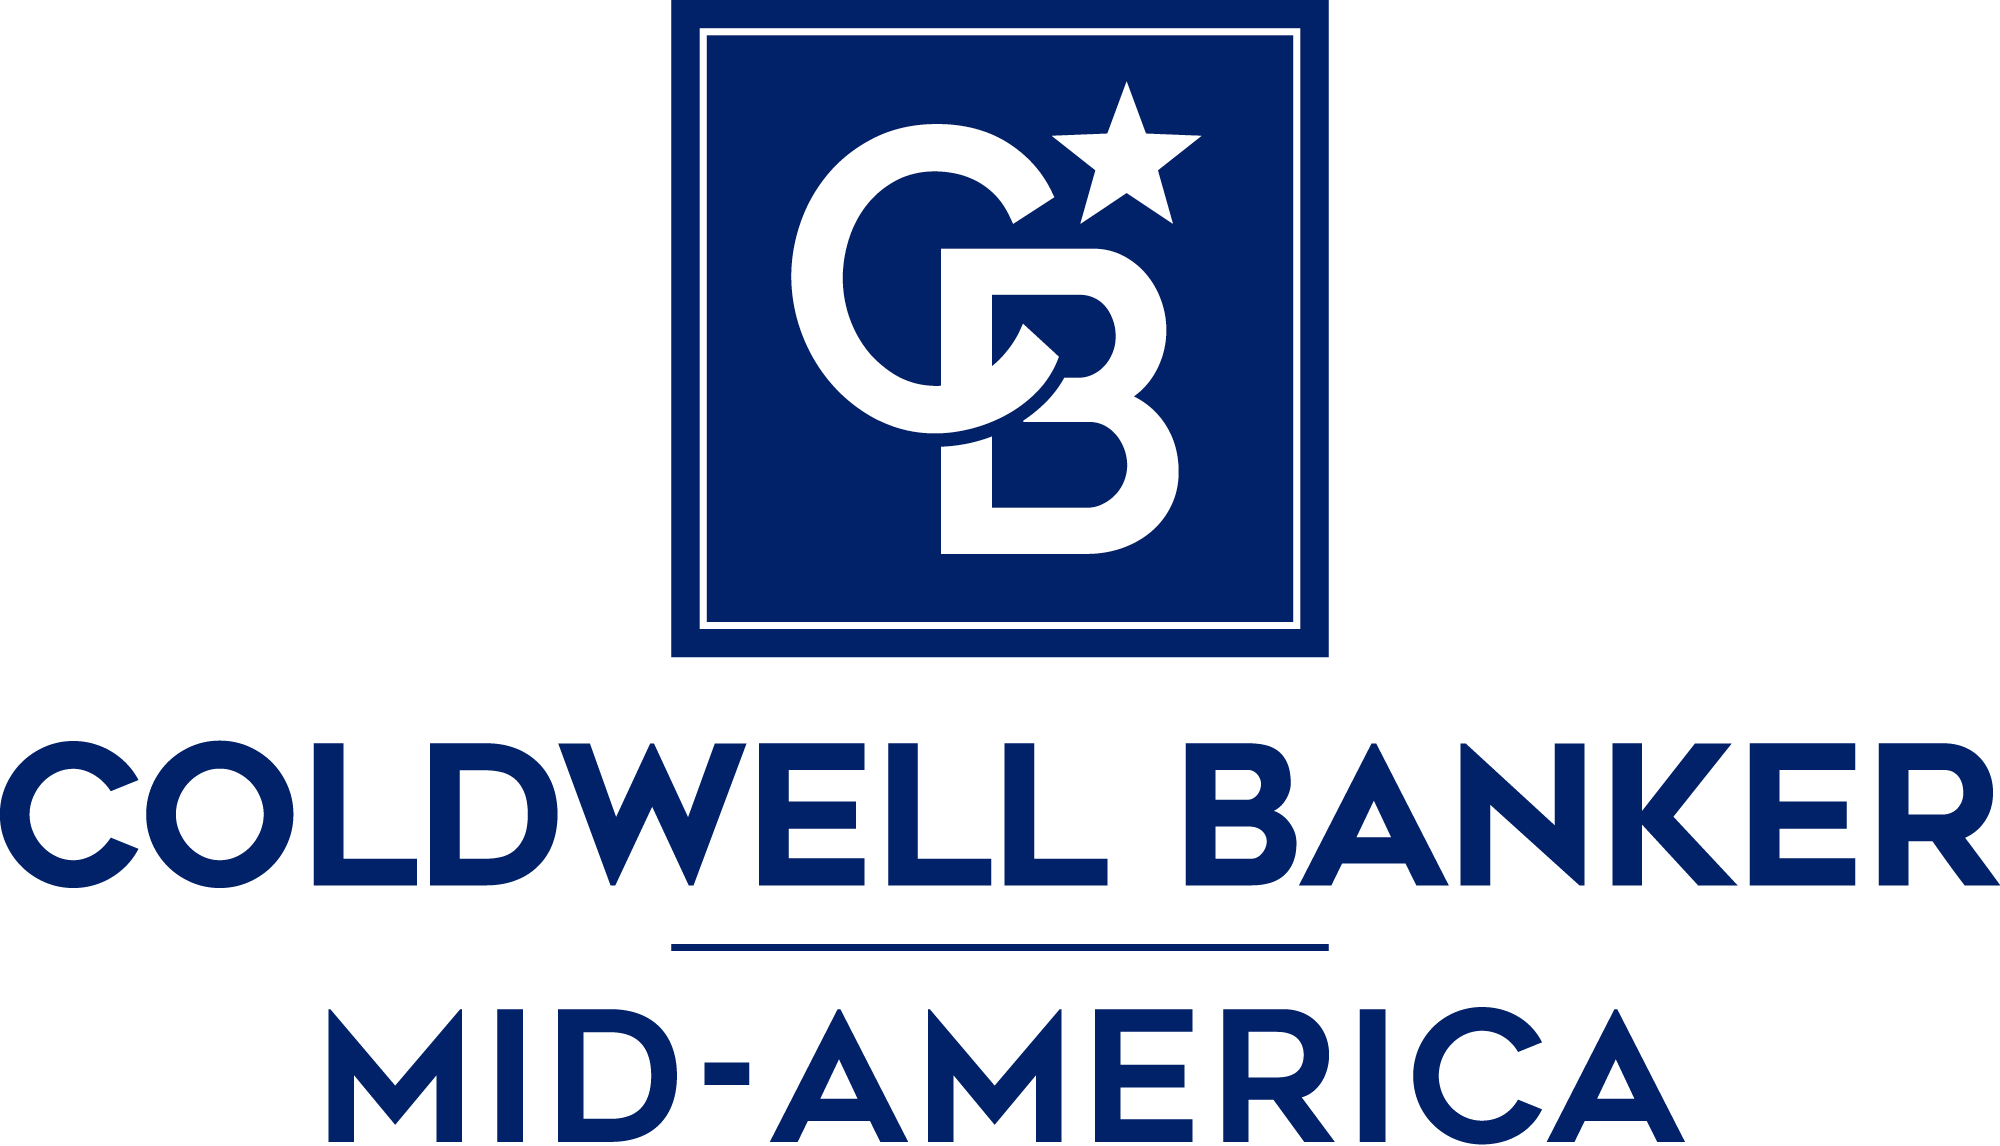 Andrew Bowles - Coldwell Banker Mid America Logo